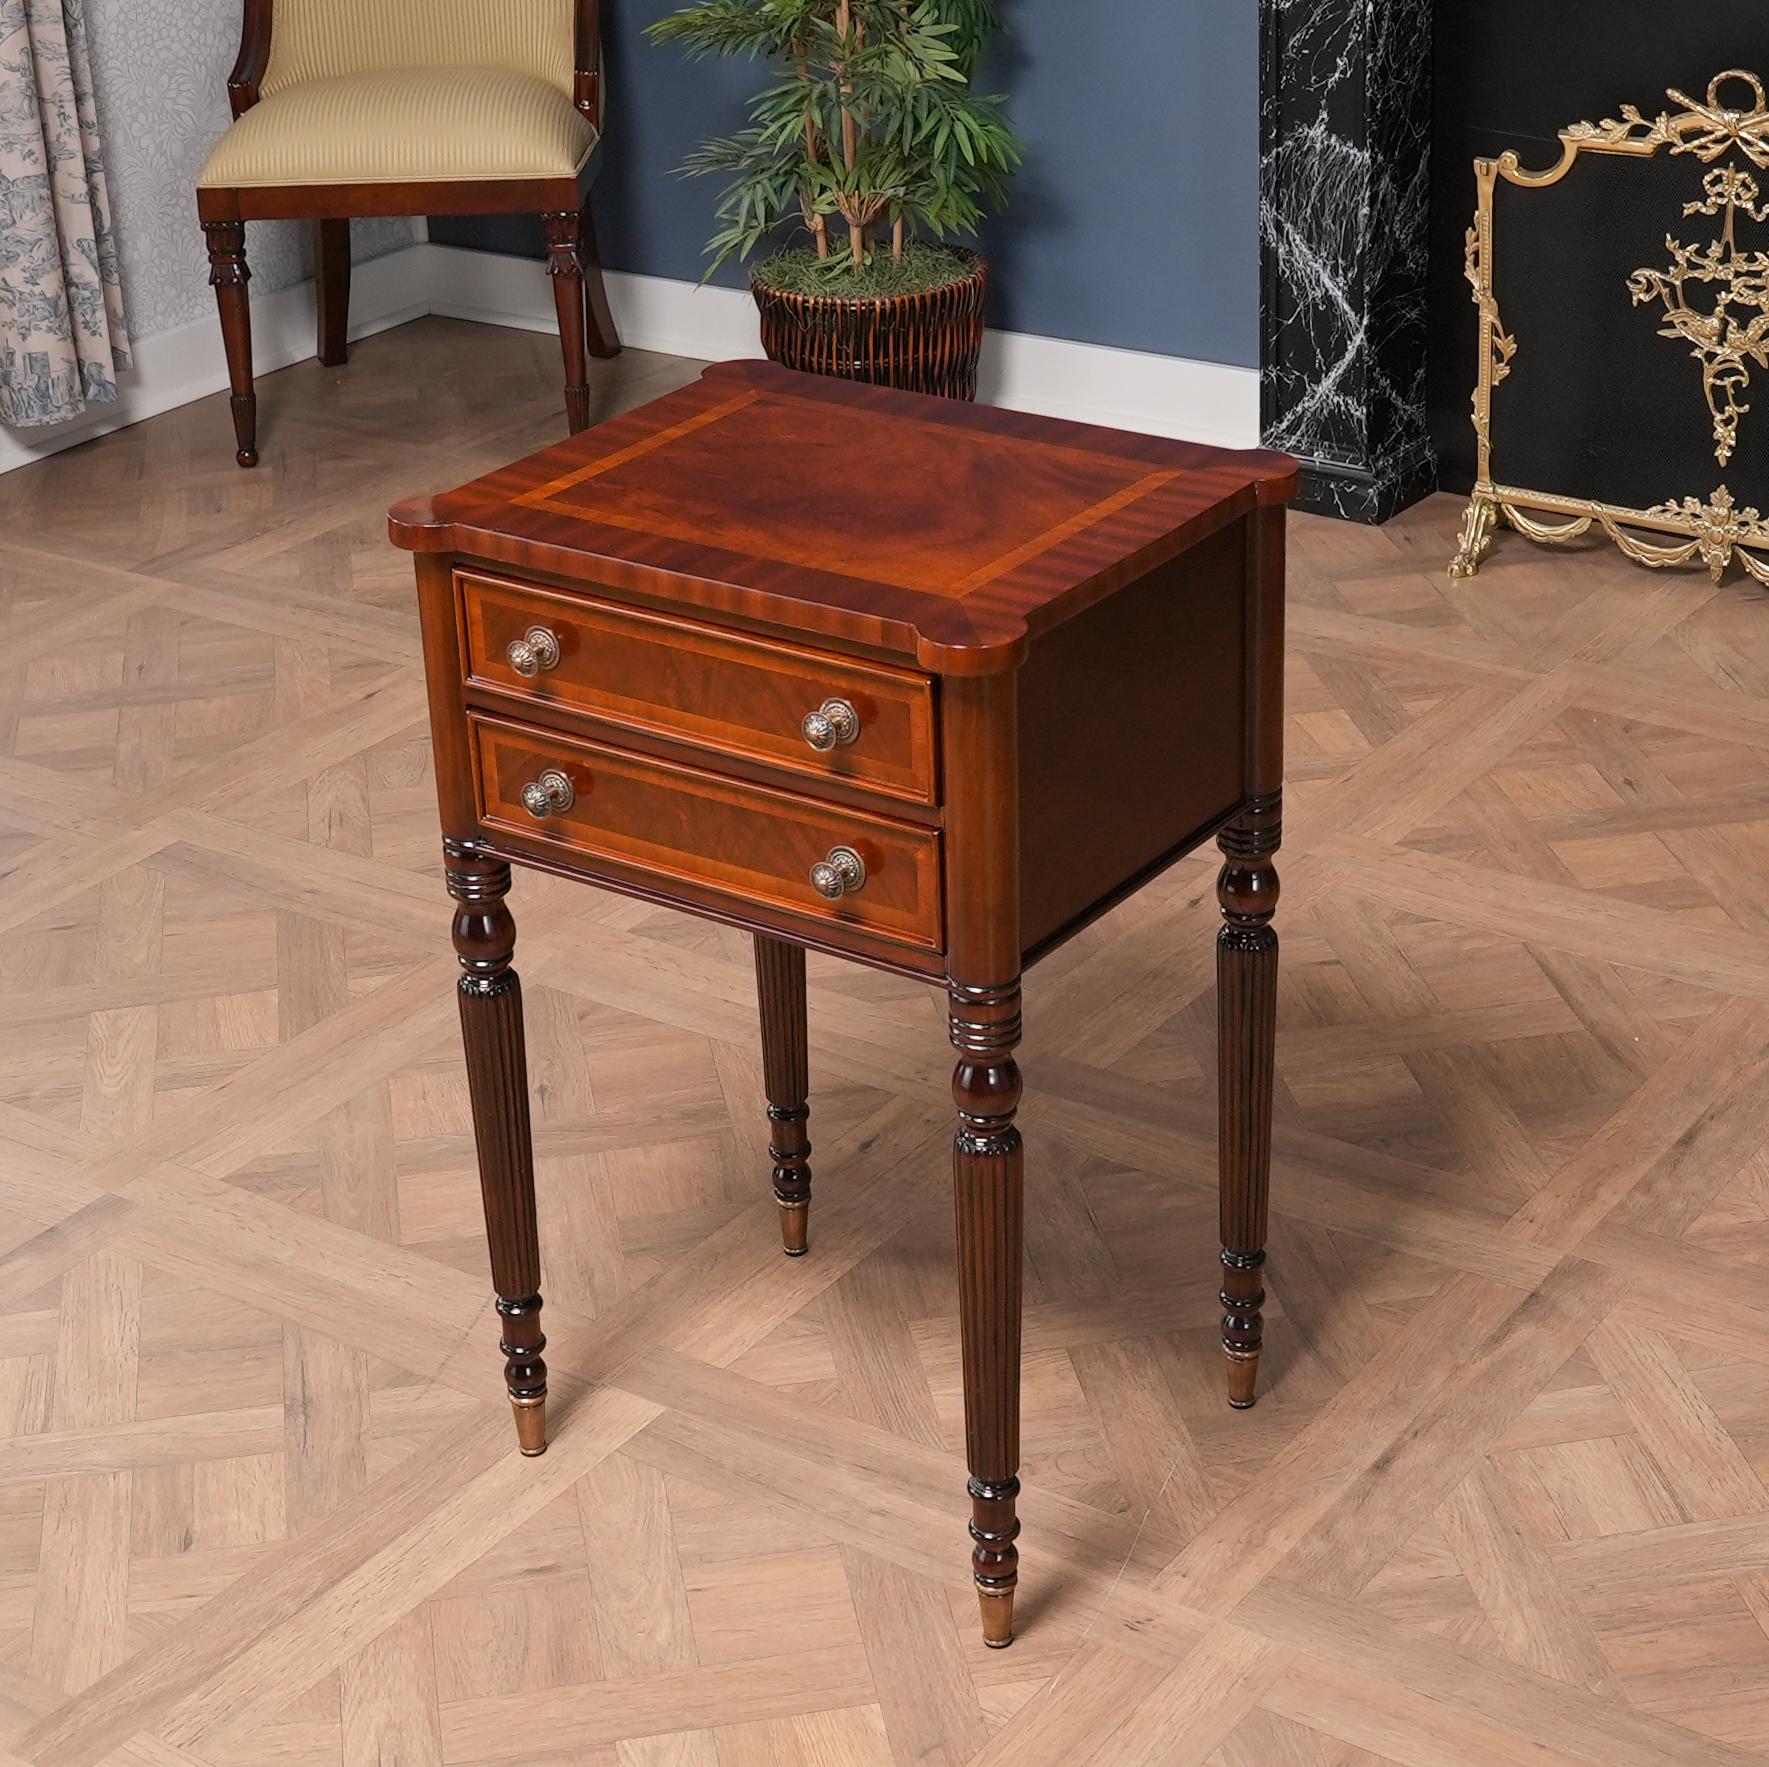 Our Sheraton End Table draws on a design first popularized by Thomas Sheraton whose work as a cabinet maker was very influential in Eighteenth Century England. The Sheraton End Table has become the best selling end table at Niagara Furniture. With